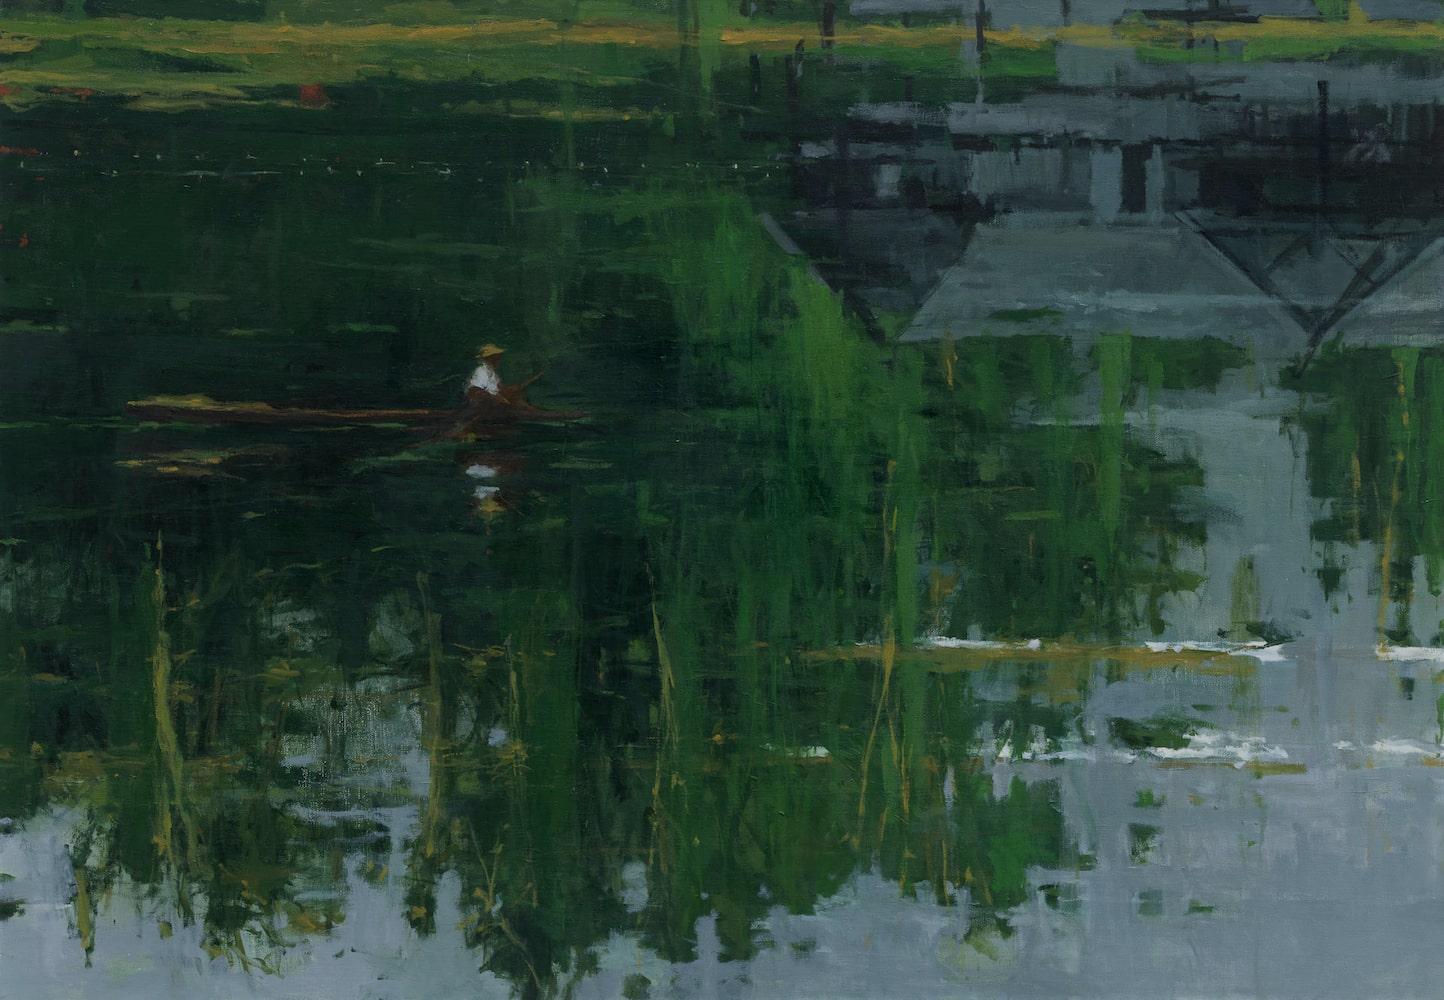 Pucate River Reflection No. 6 by Calo Carratalá - large waterscape painting